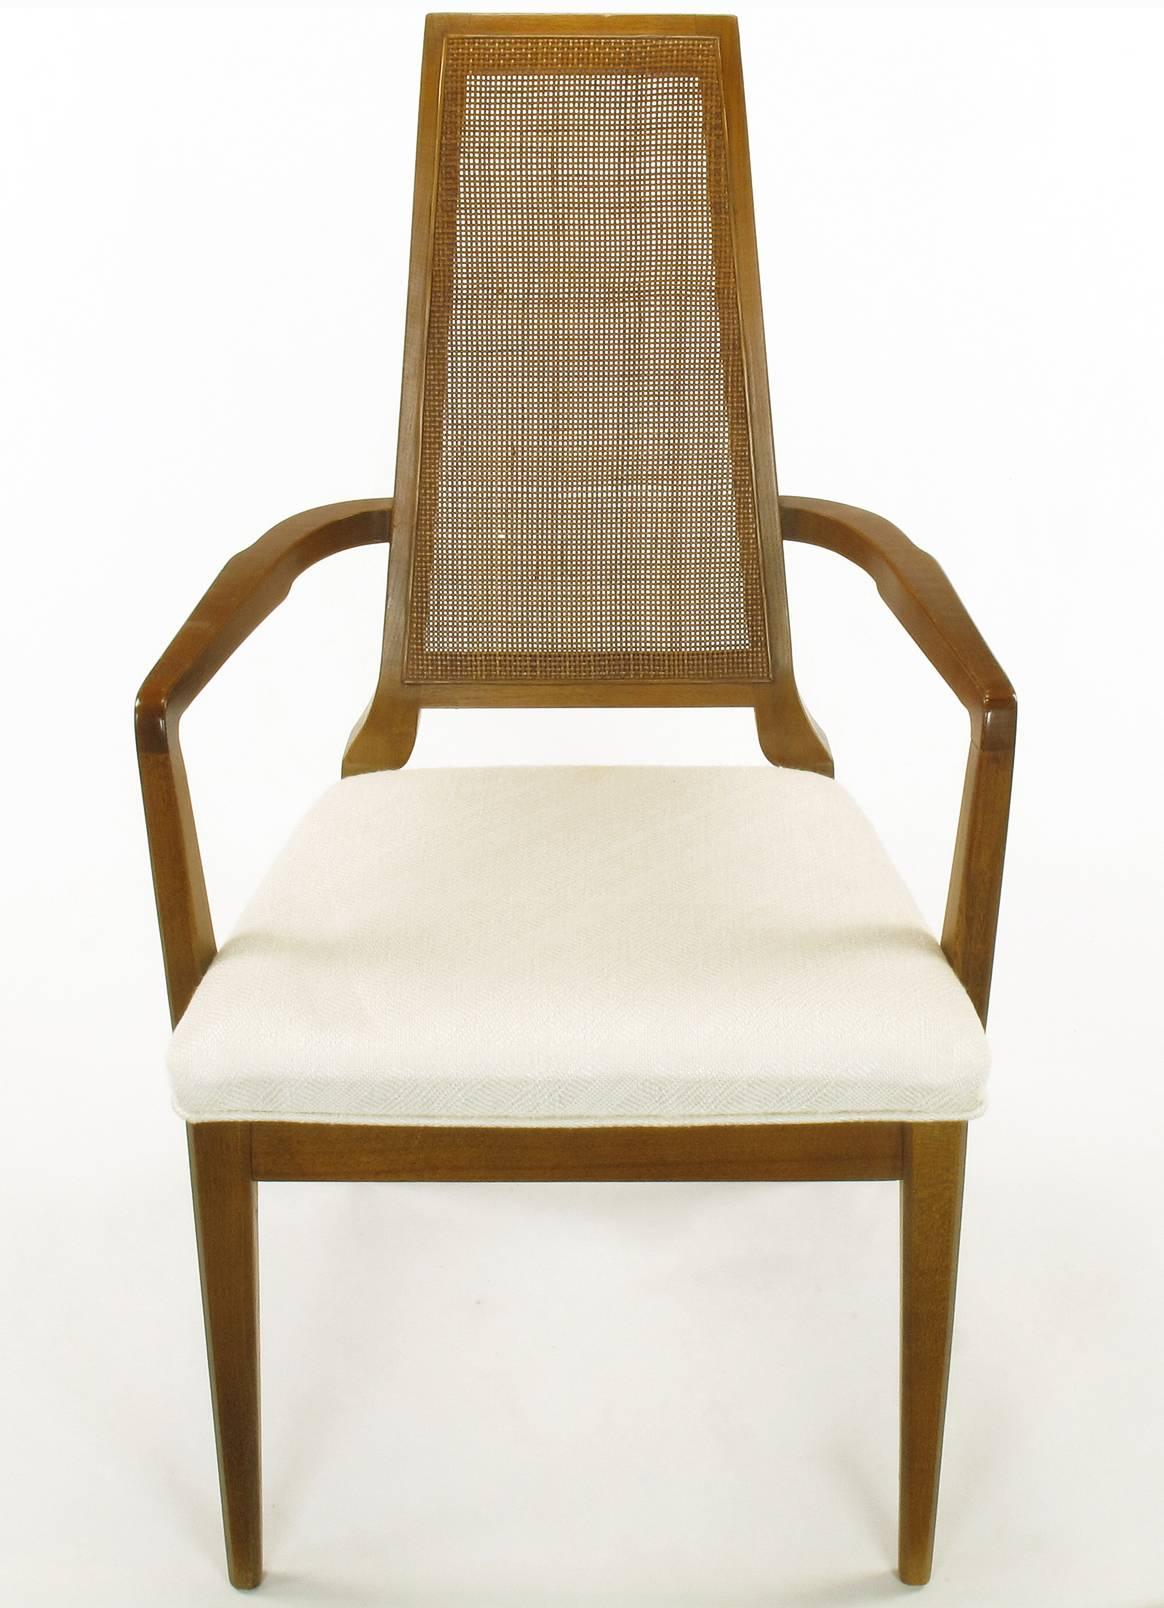 1950s Modern set of six Danish weave cane back dining chairs. Finely carved walnut frames with uncommon details such as the curved narrow backs and sculptural legs. Upholstered in a woven Haitian cotton with relief detailing.

Armchairs measure: